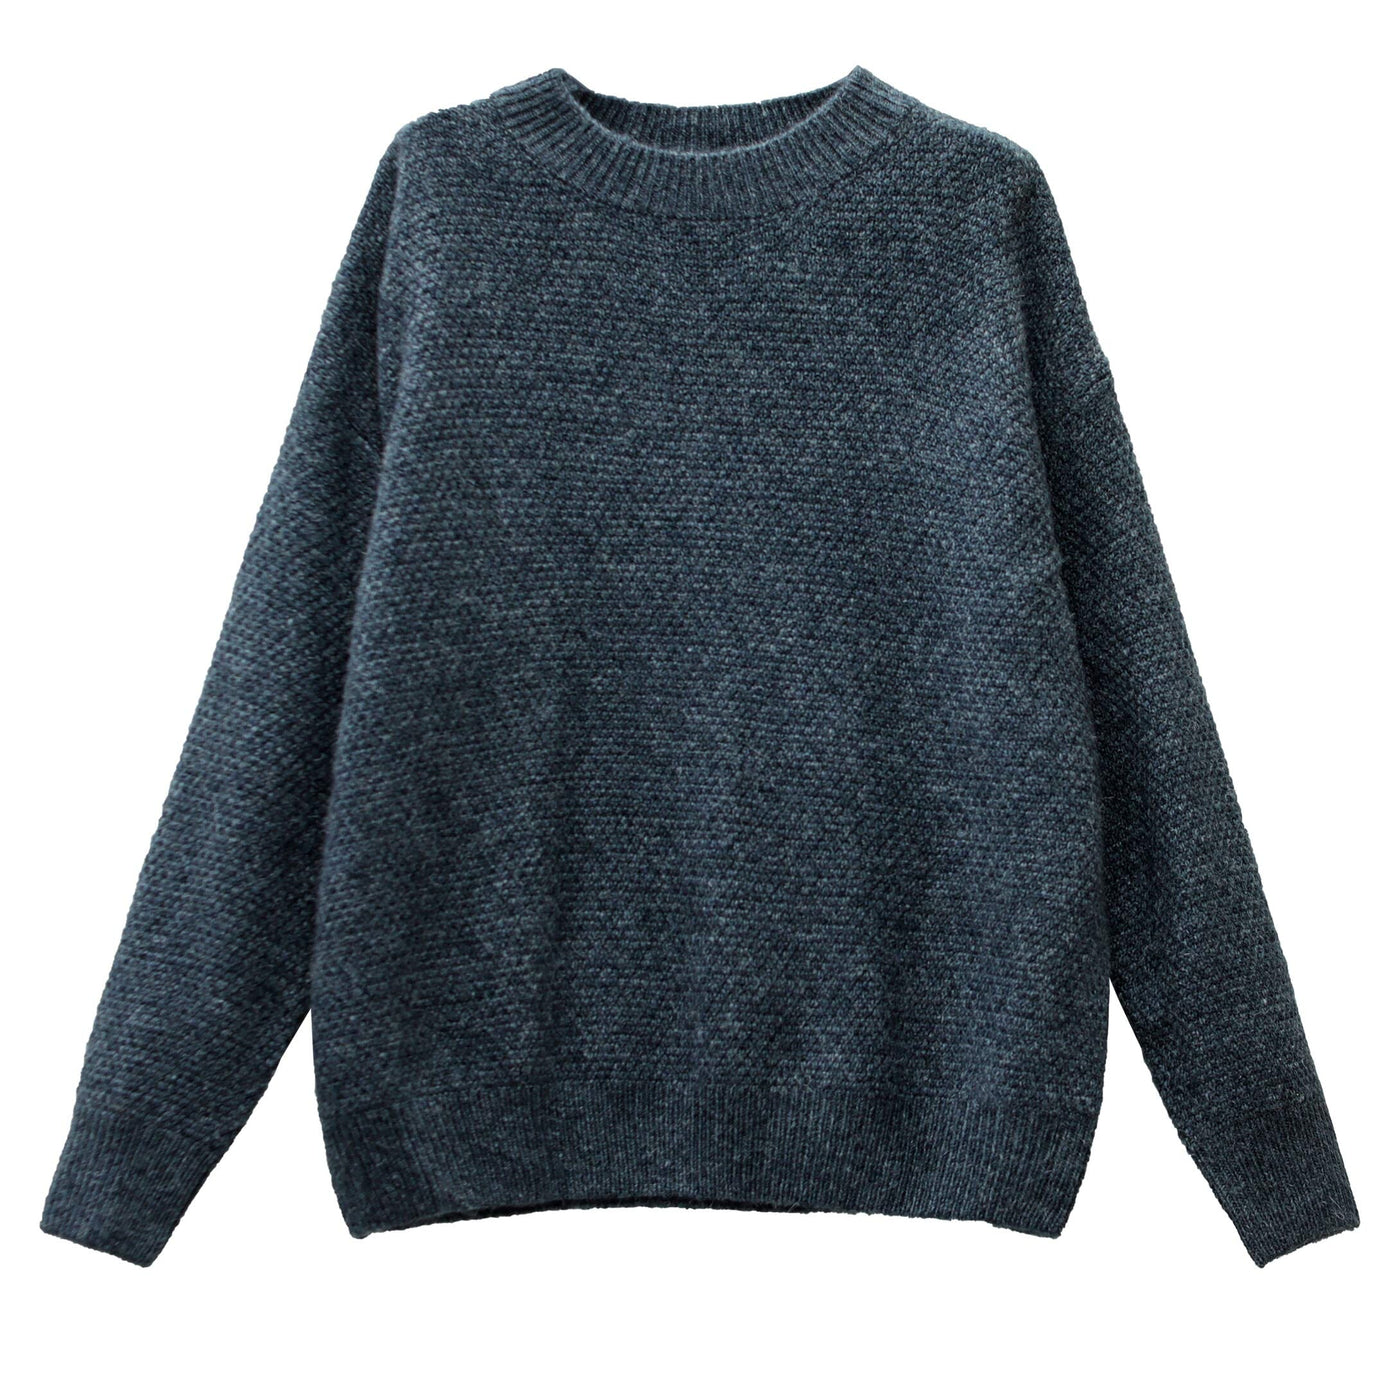 Women Solid Loose Knitted Autumn Winter Warm Sweater Jan 2023 New Arrival 